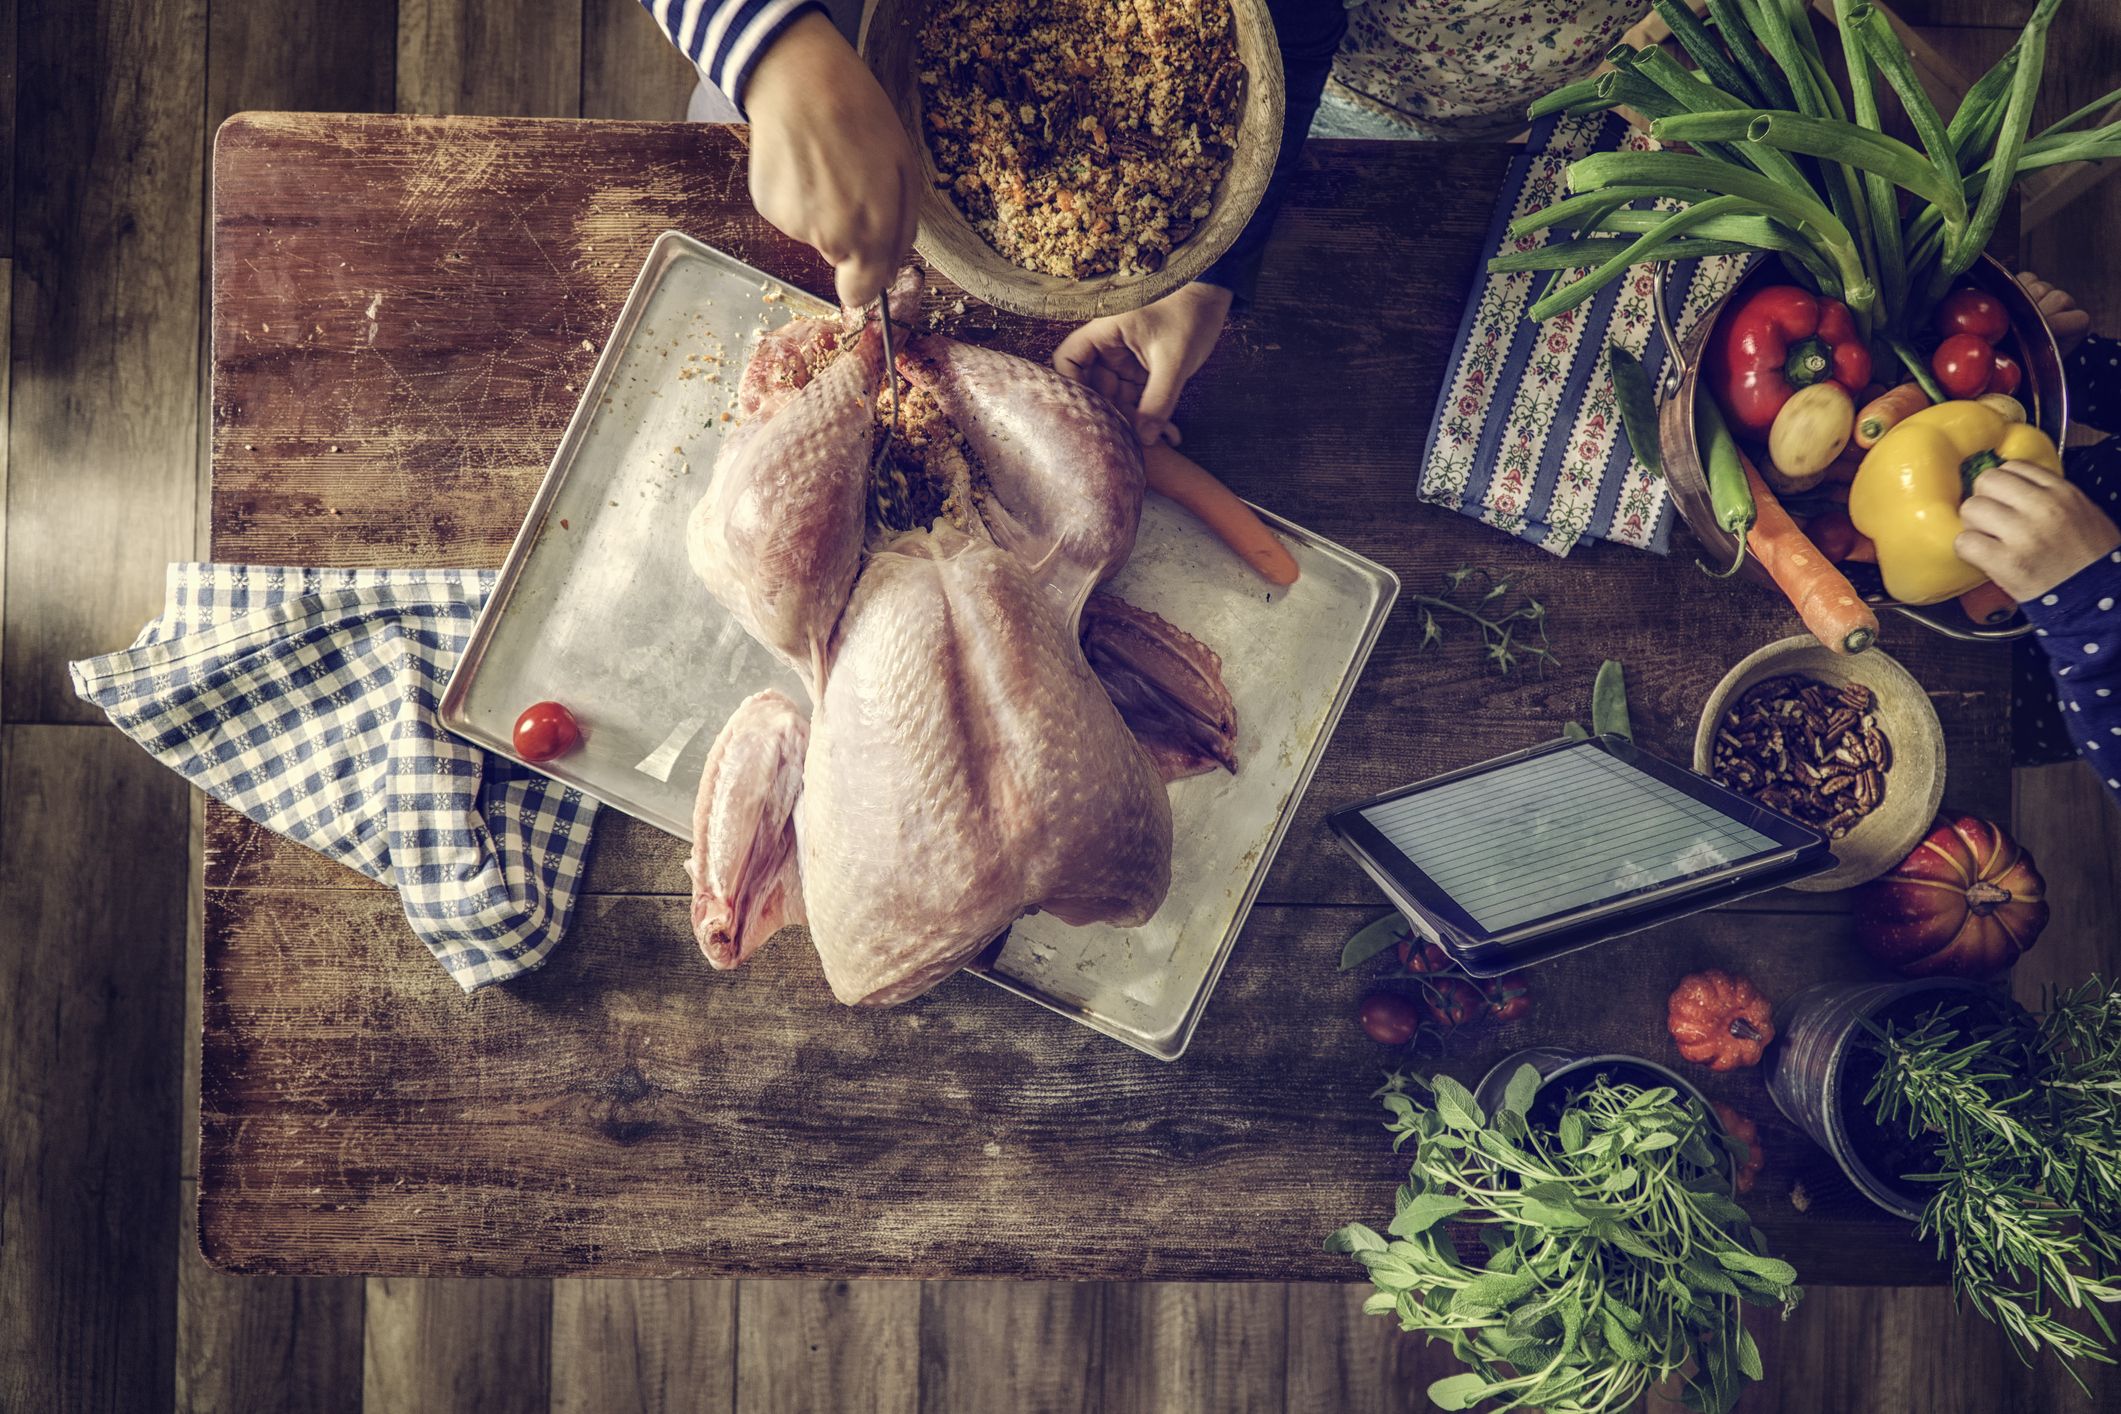 Real-life tips for a stress-free Thanksgiving